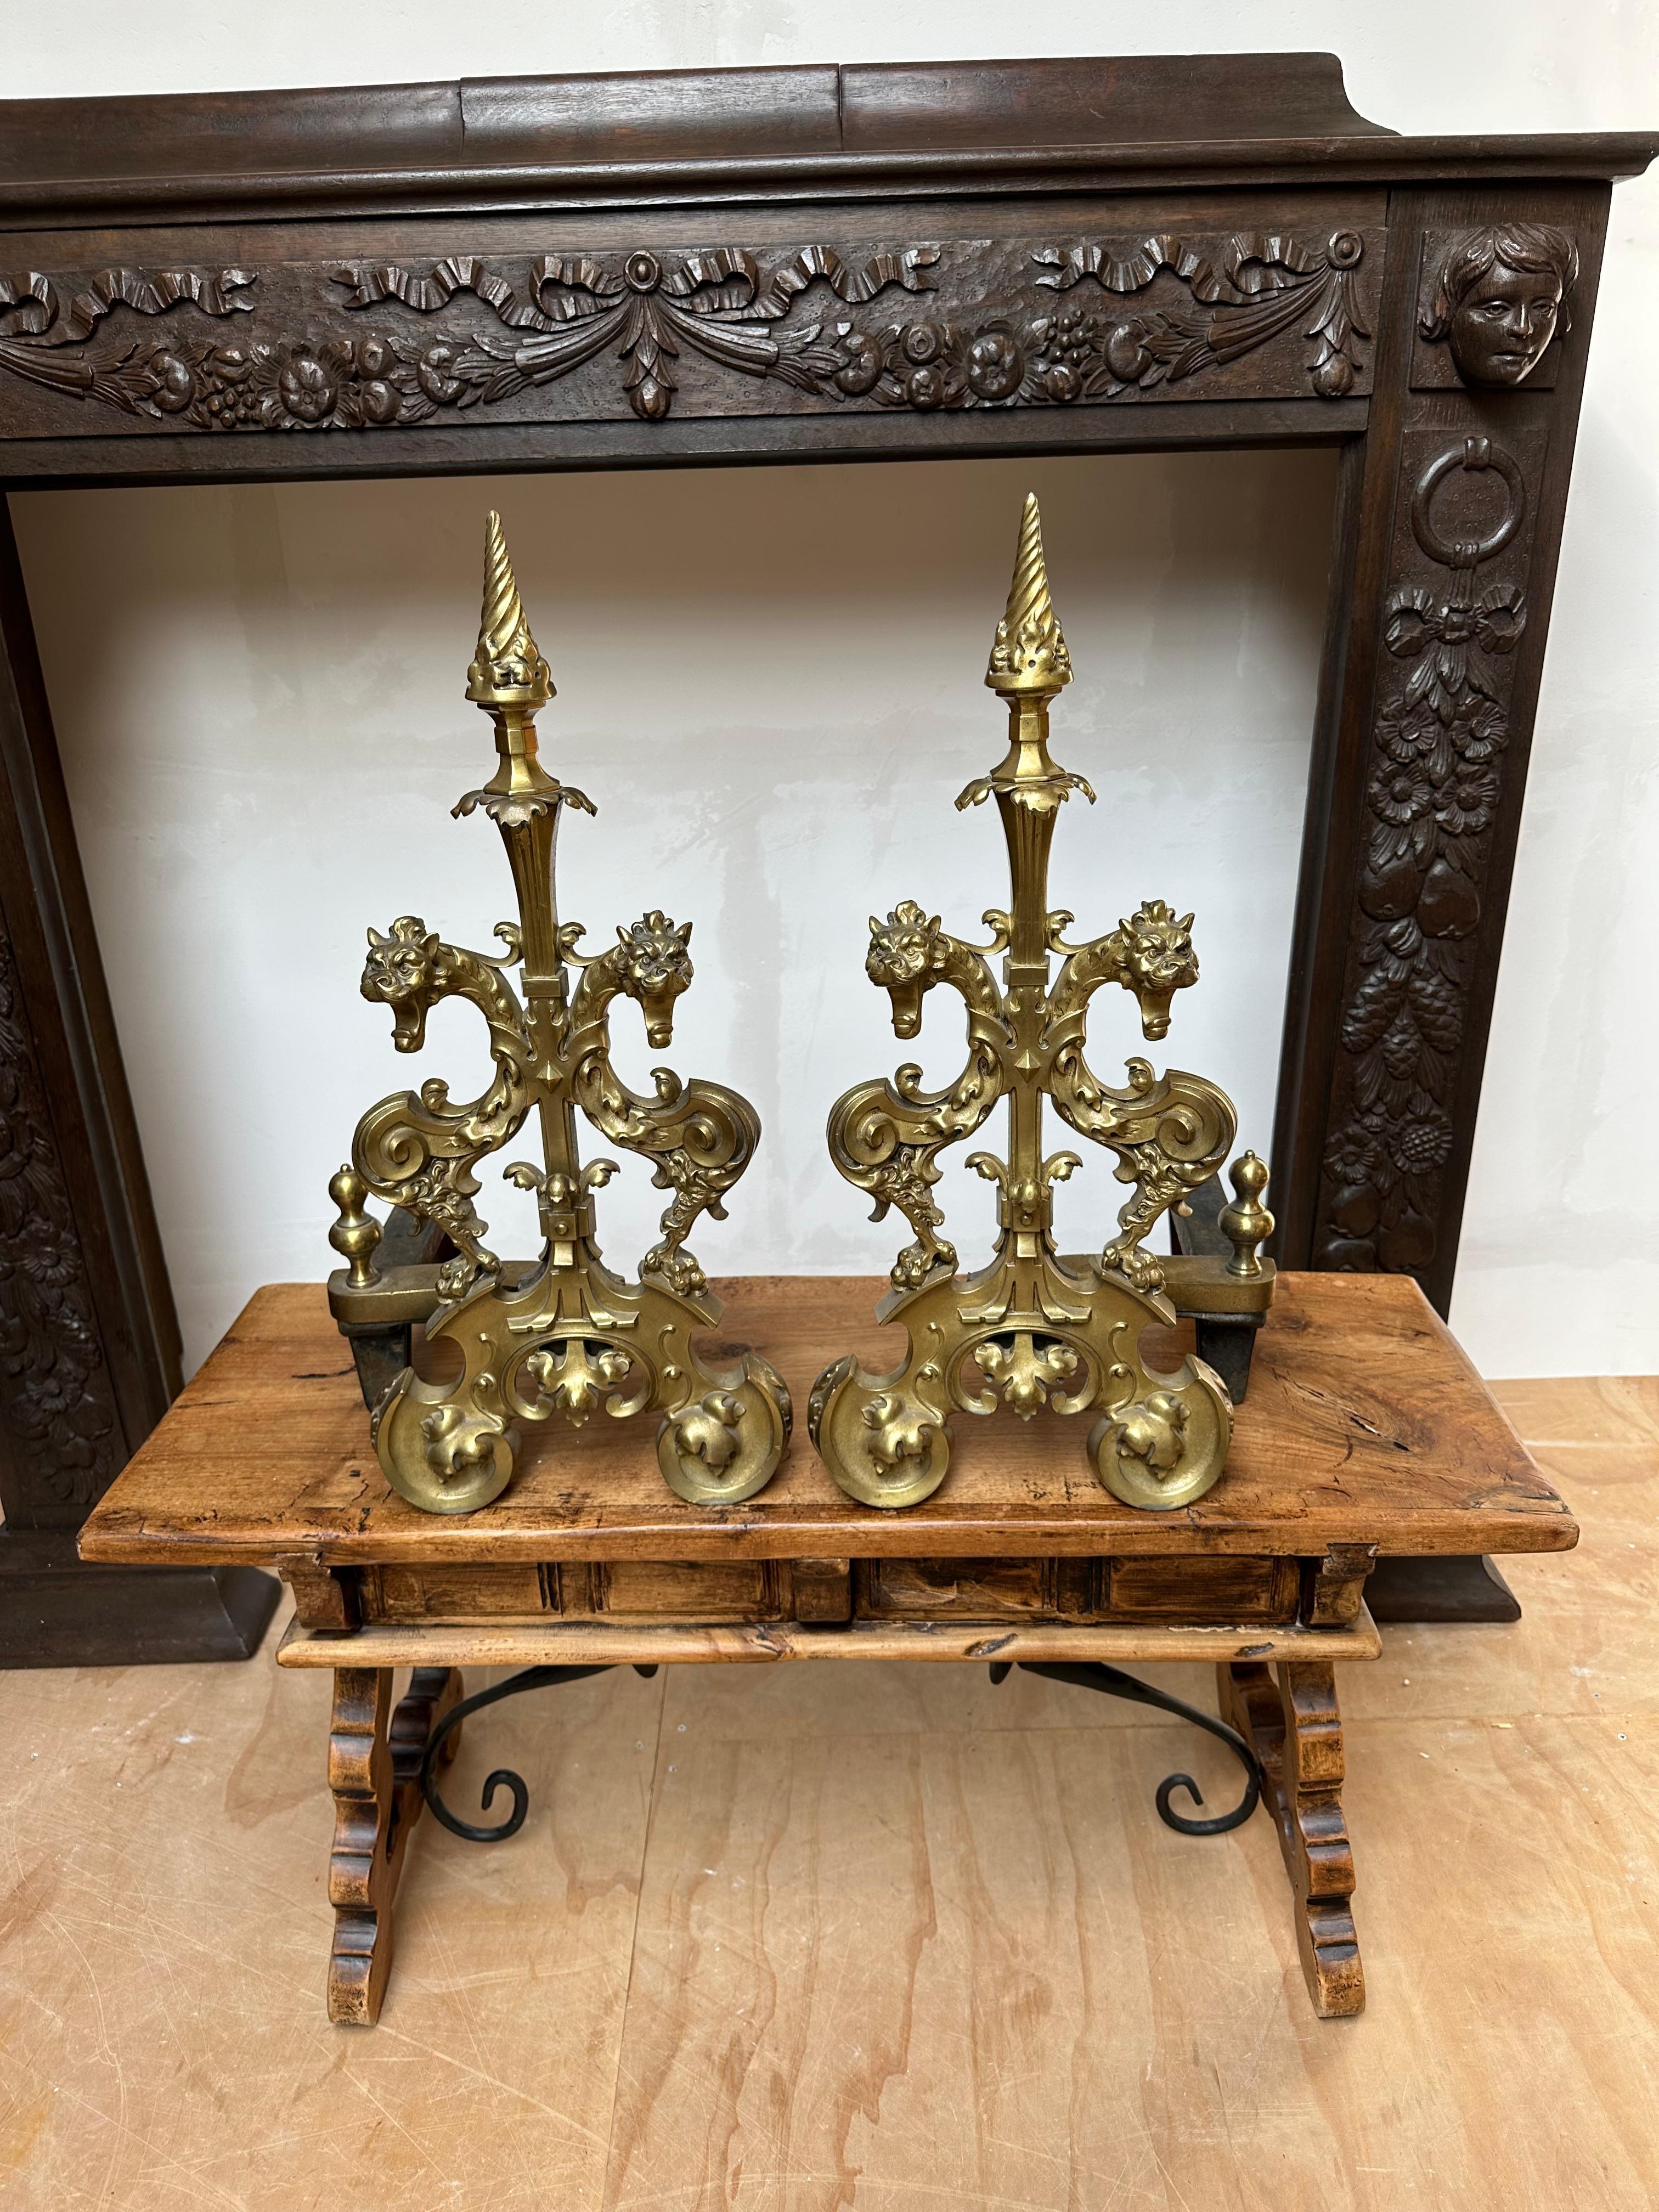 Imagine these in your fireplace with the flames burning on all sides.

These beautifully and all handcrafted, large and fire-gilt bronze andirons are made to stand in your fireplace as in image number one, but then facing straight forward. The idea